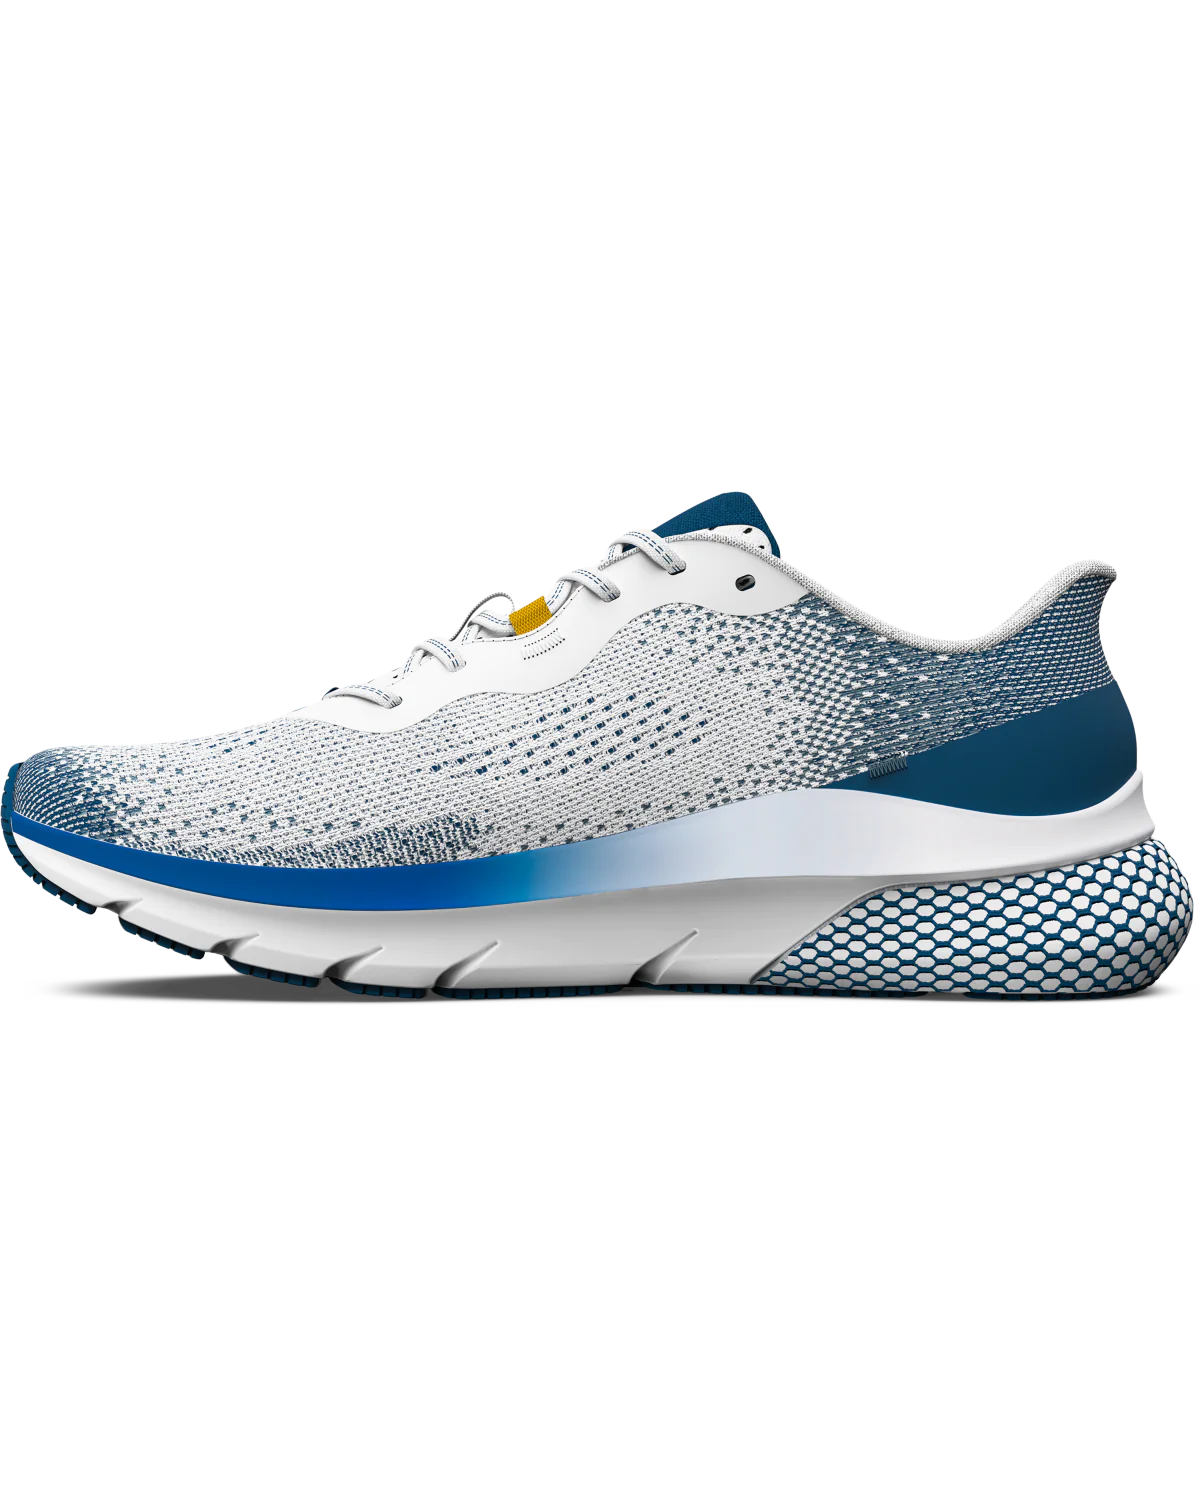 Under Armour HOVR Turbulence 2 White